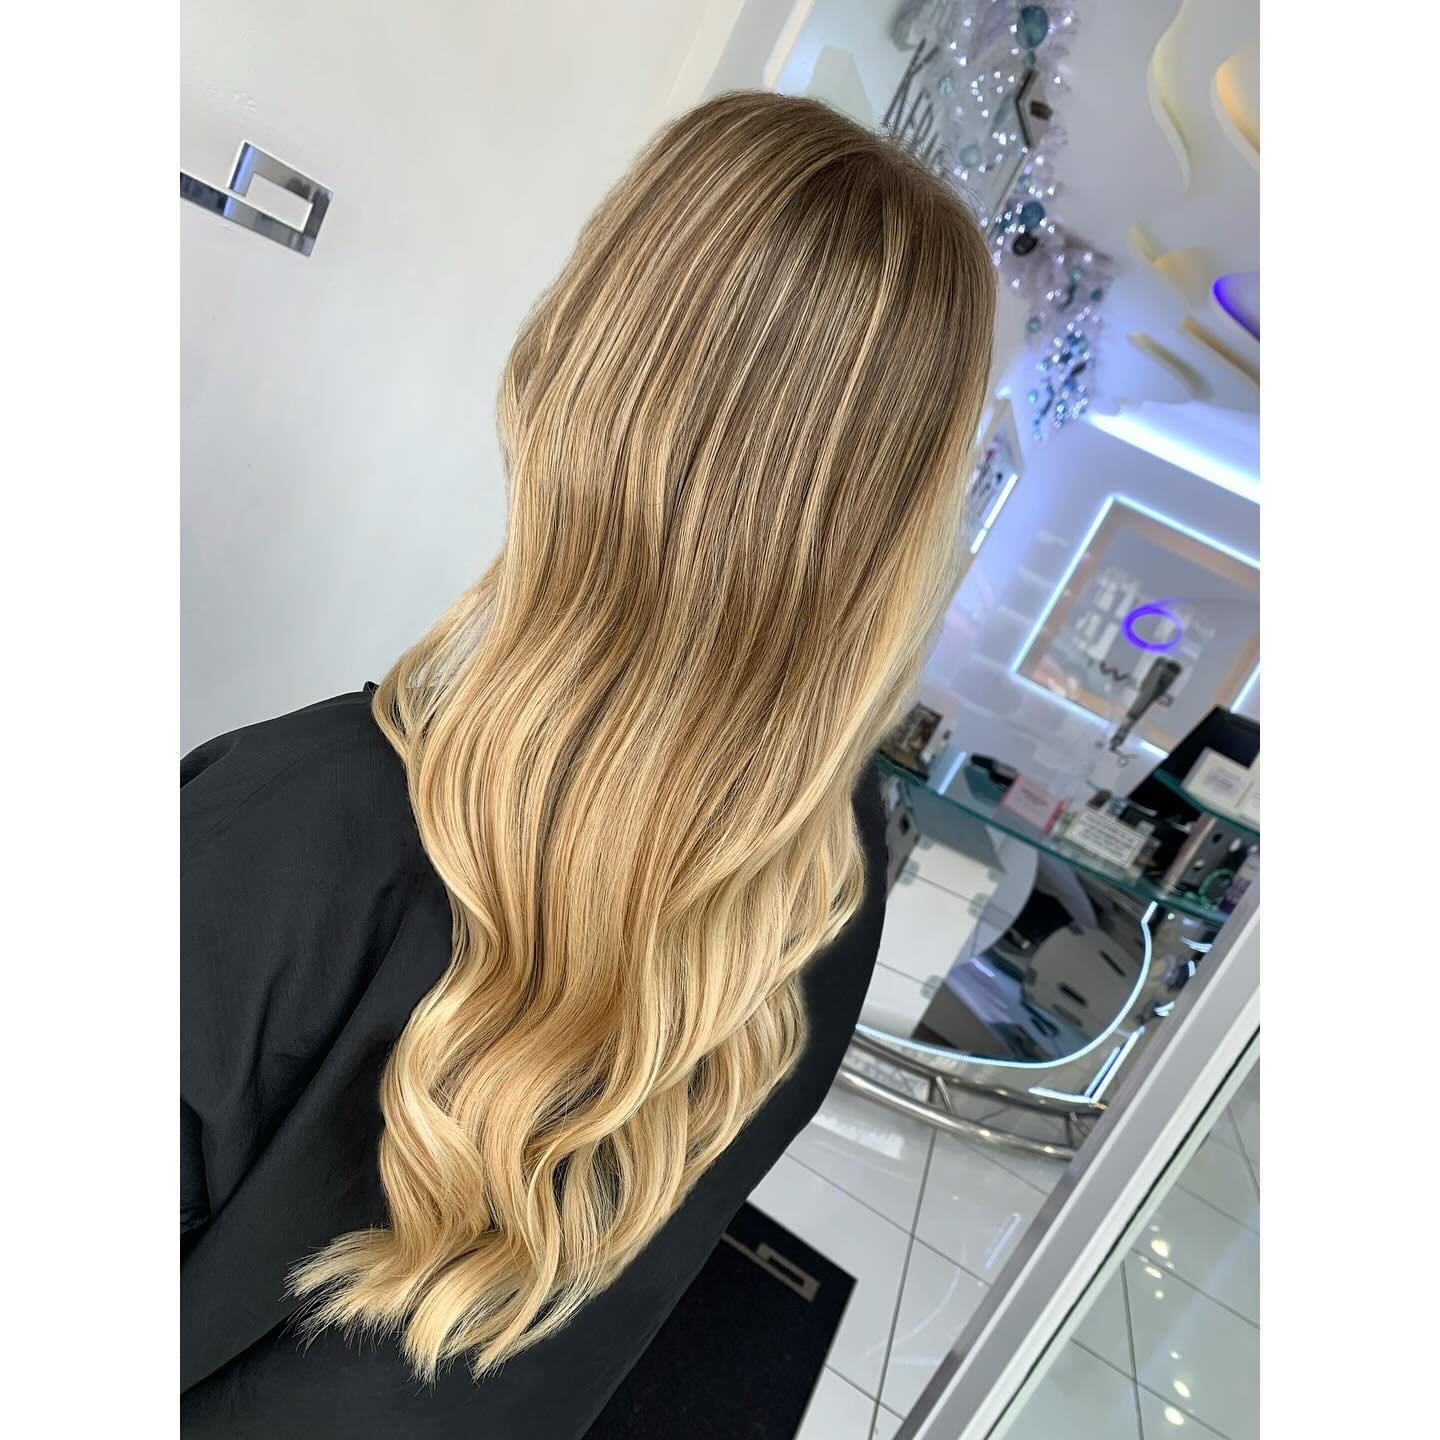 | W i n t e r  B l e n d |  All eyes on this sensational, signature honey blonde balayage refresh by Steph ♡︎

SWIPE &lt; across for more &lt; IMAGES and the &lt; BEFORE 📸
📷 

𝗗𝗢𝗡&rsquo;𝗧 𝗠𝗜𝗦𝗦 𝗢𝗨𝗧 𝗼𝗻 𝗼𝘂𝗿 𝗳𝗮𝗻𝘁𝗮𝘀𝘁𝗶𝗰 𝗰𝗼𝗹𝗼?